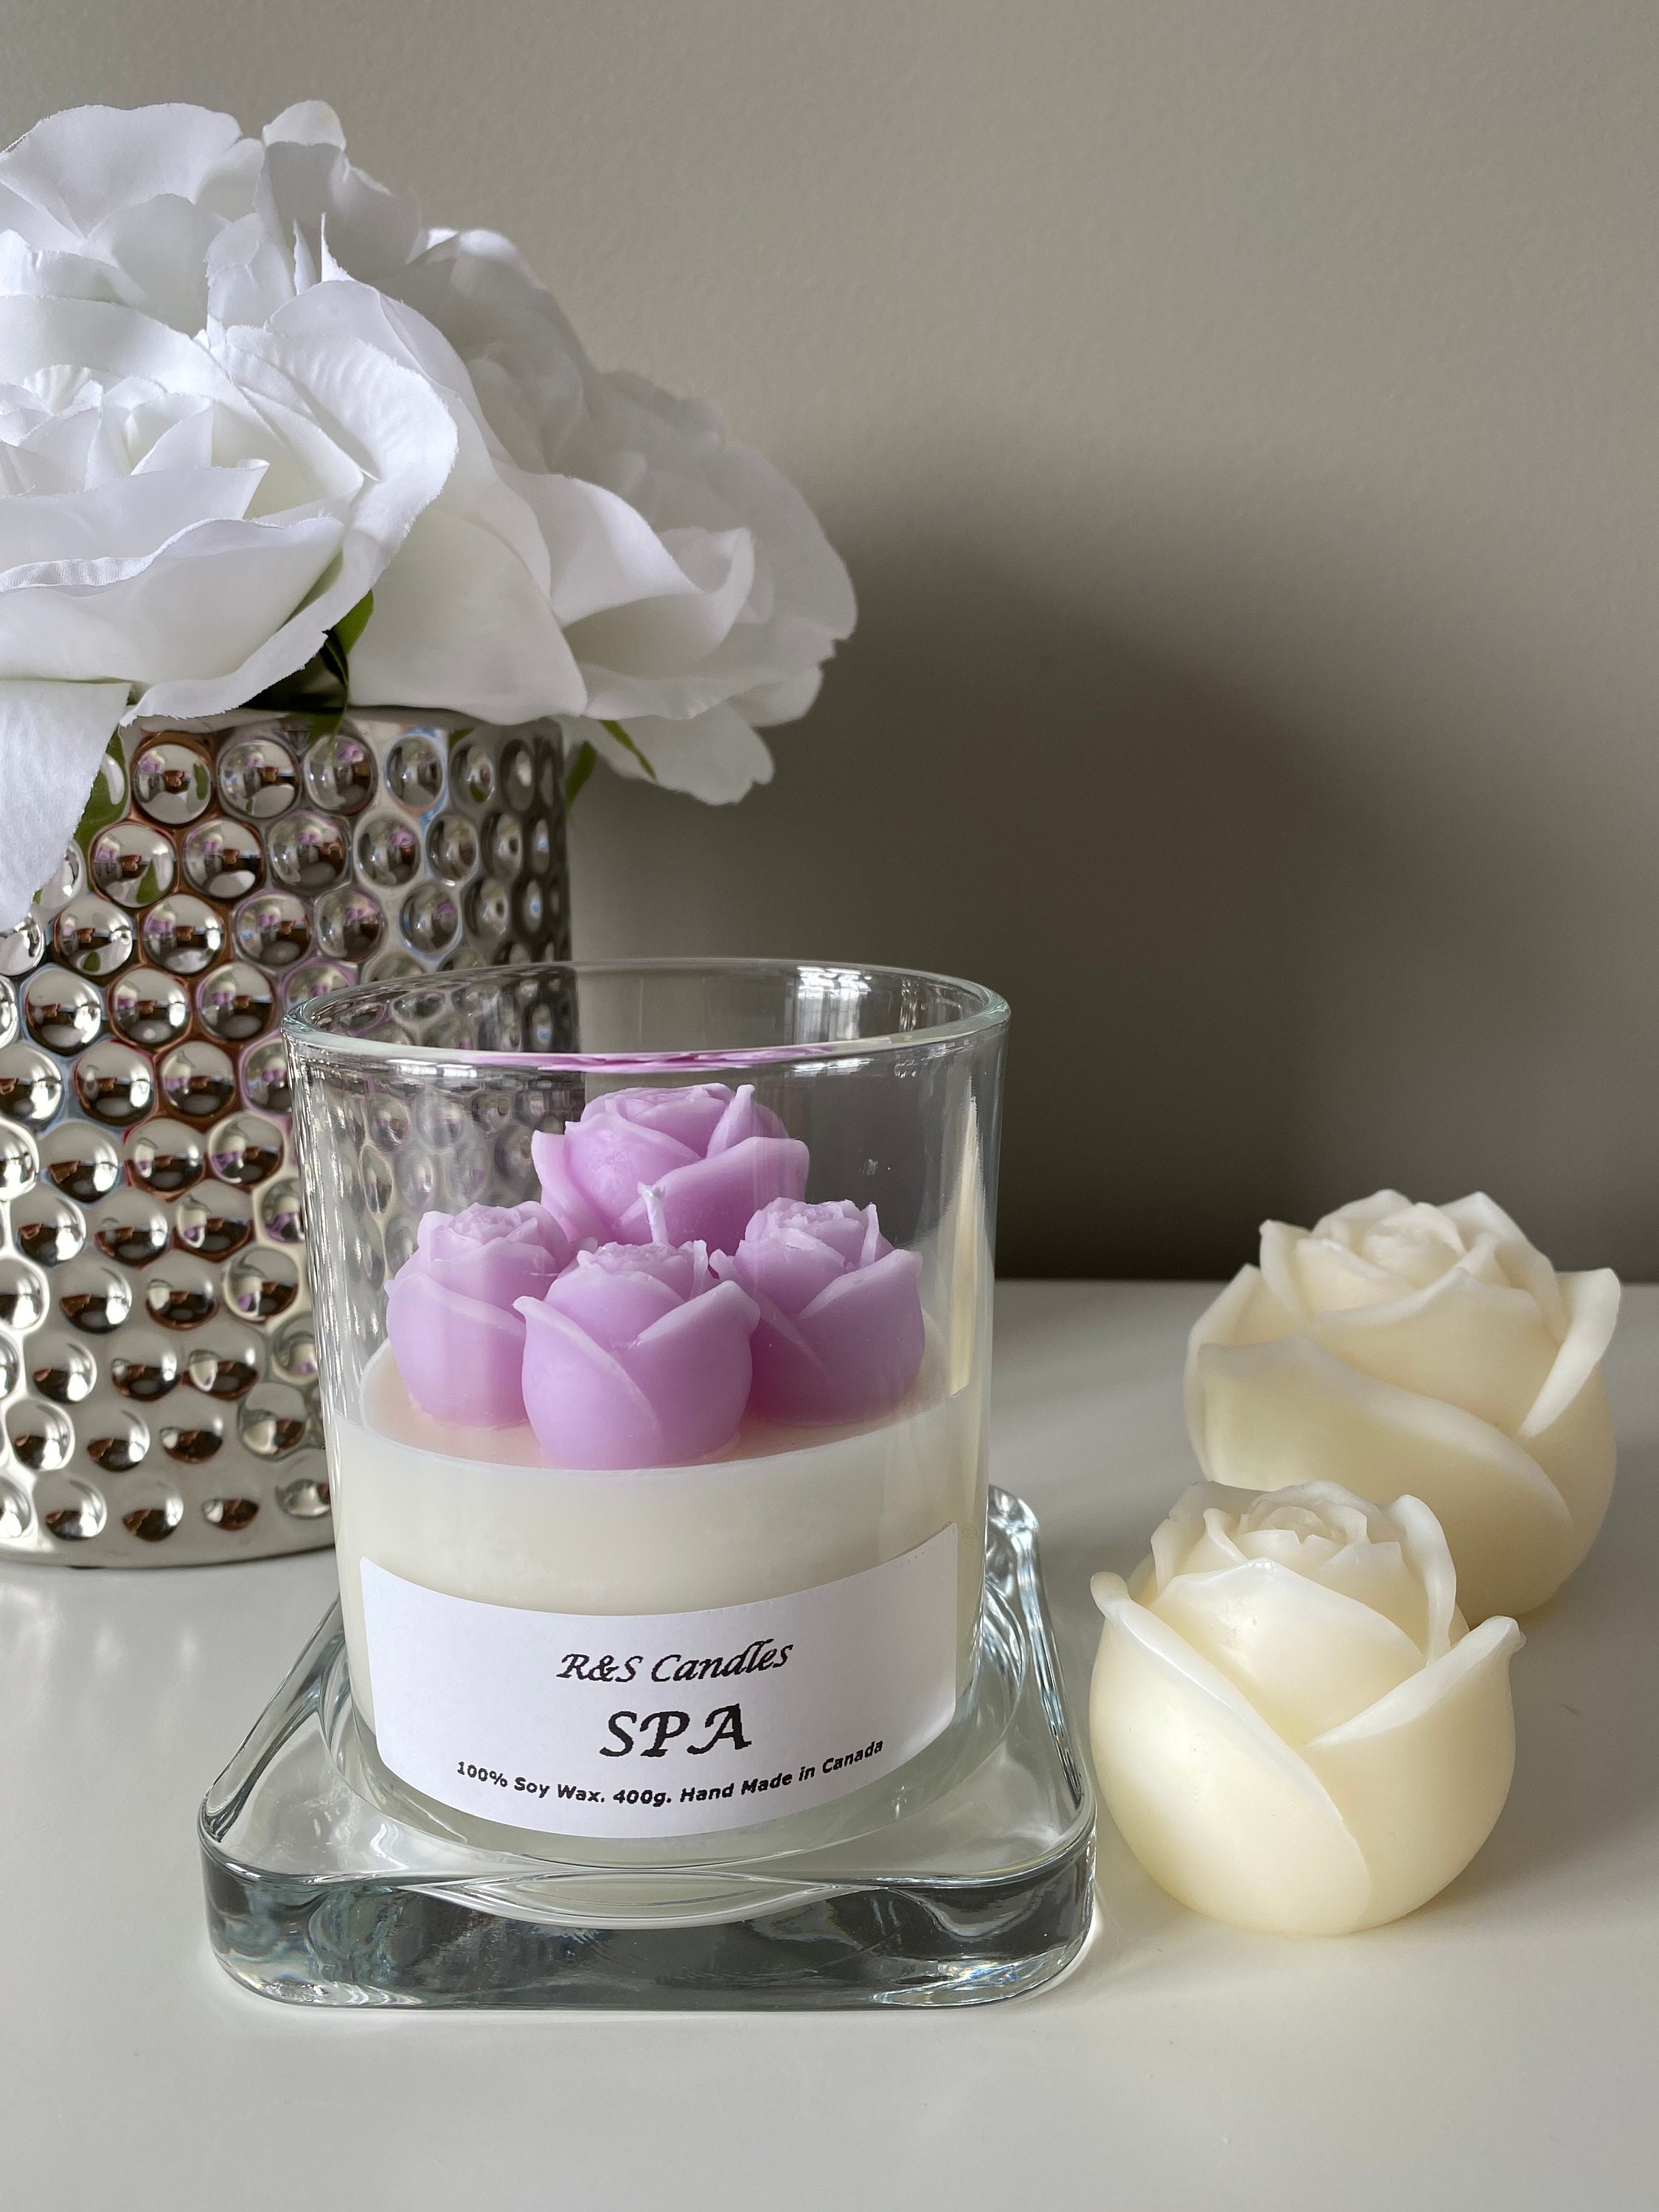 Add Your Company Name - Valentine's Theme - Organic Soy Wax Candle